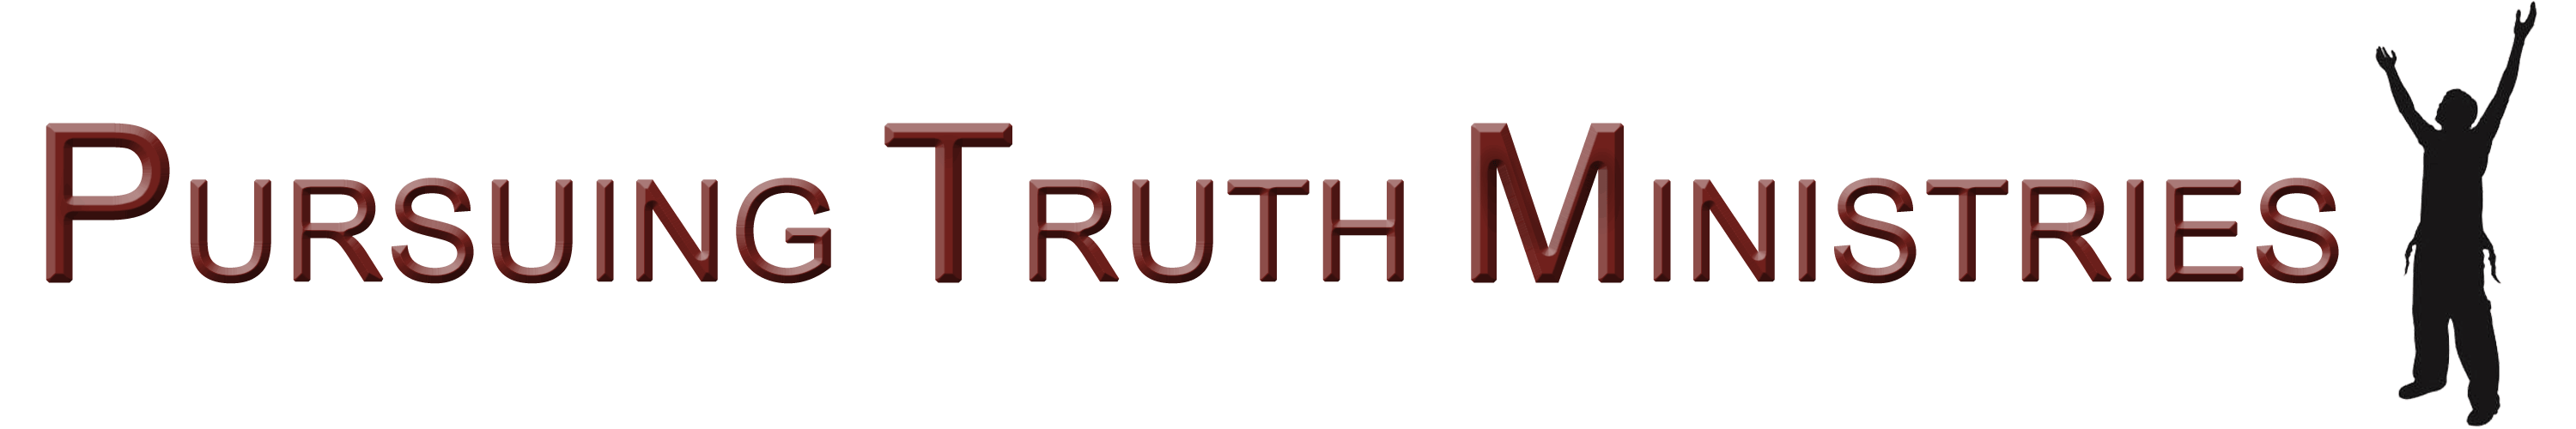 Pursuing Truth Ministries